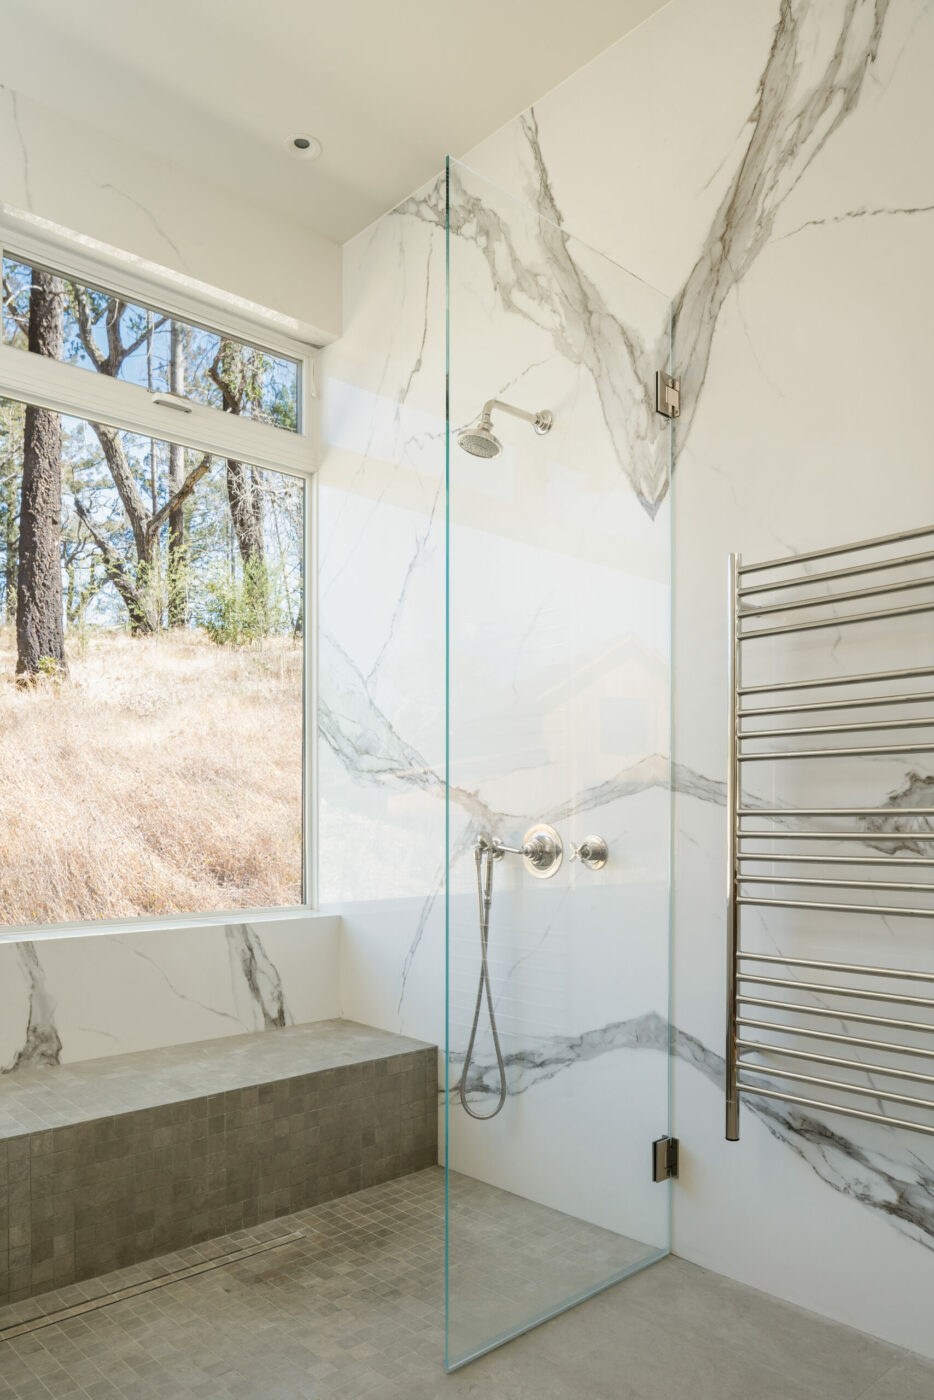 The privacy of the property allowed for a window in the shower. (Adam Potts Photography)